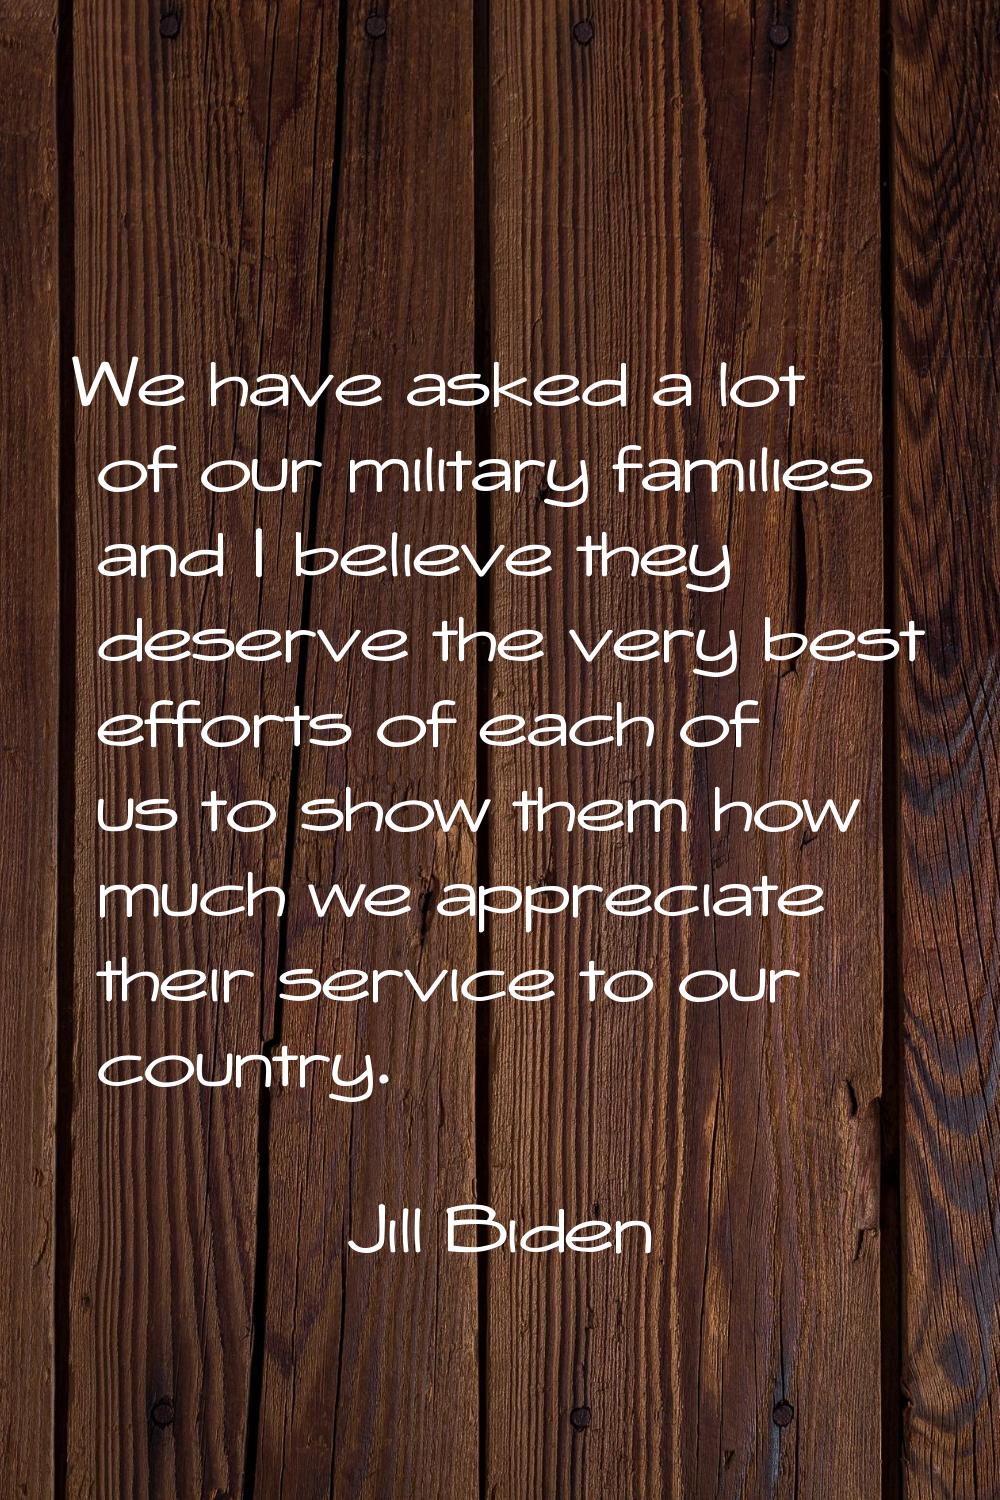 We have asked a lot of our military families and I believe they deserve the very best efforts of ea